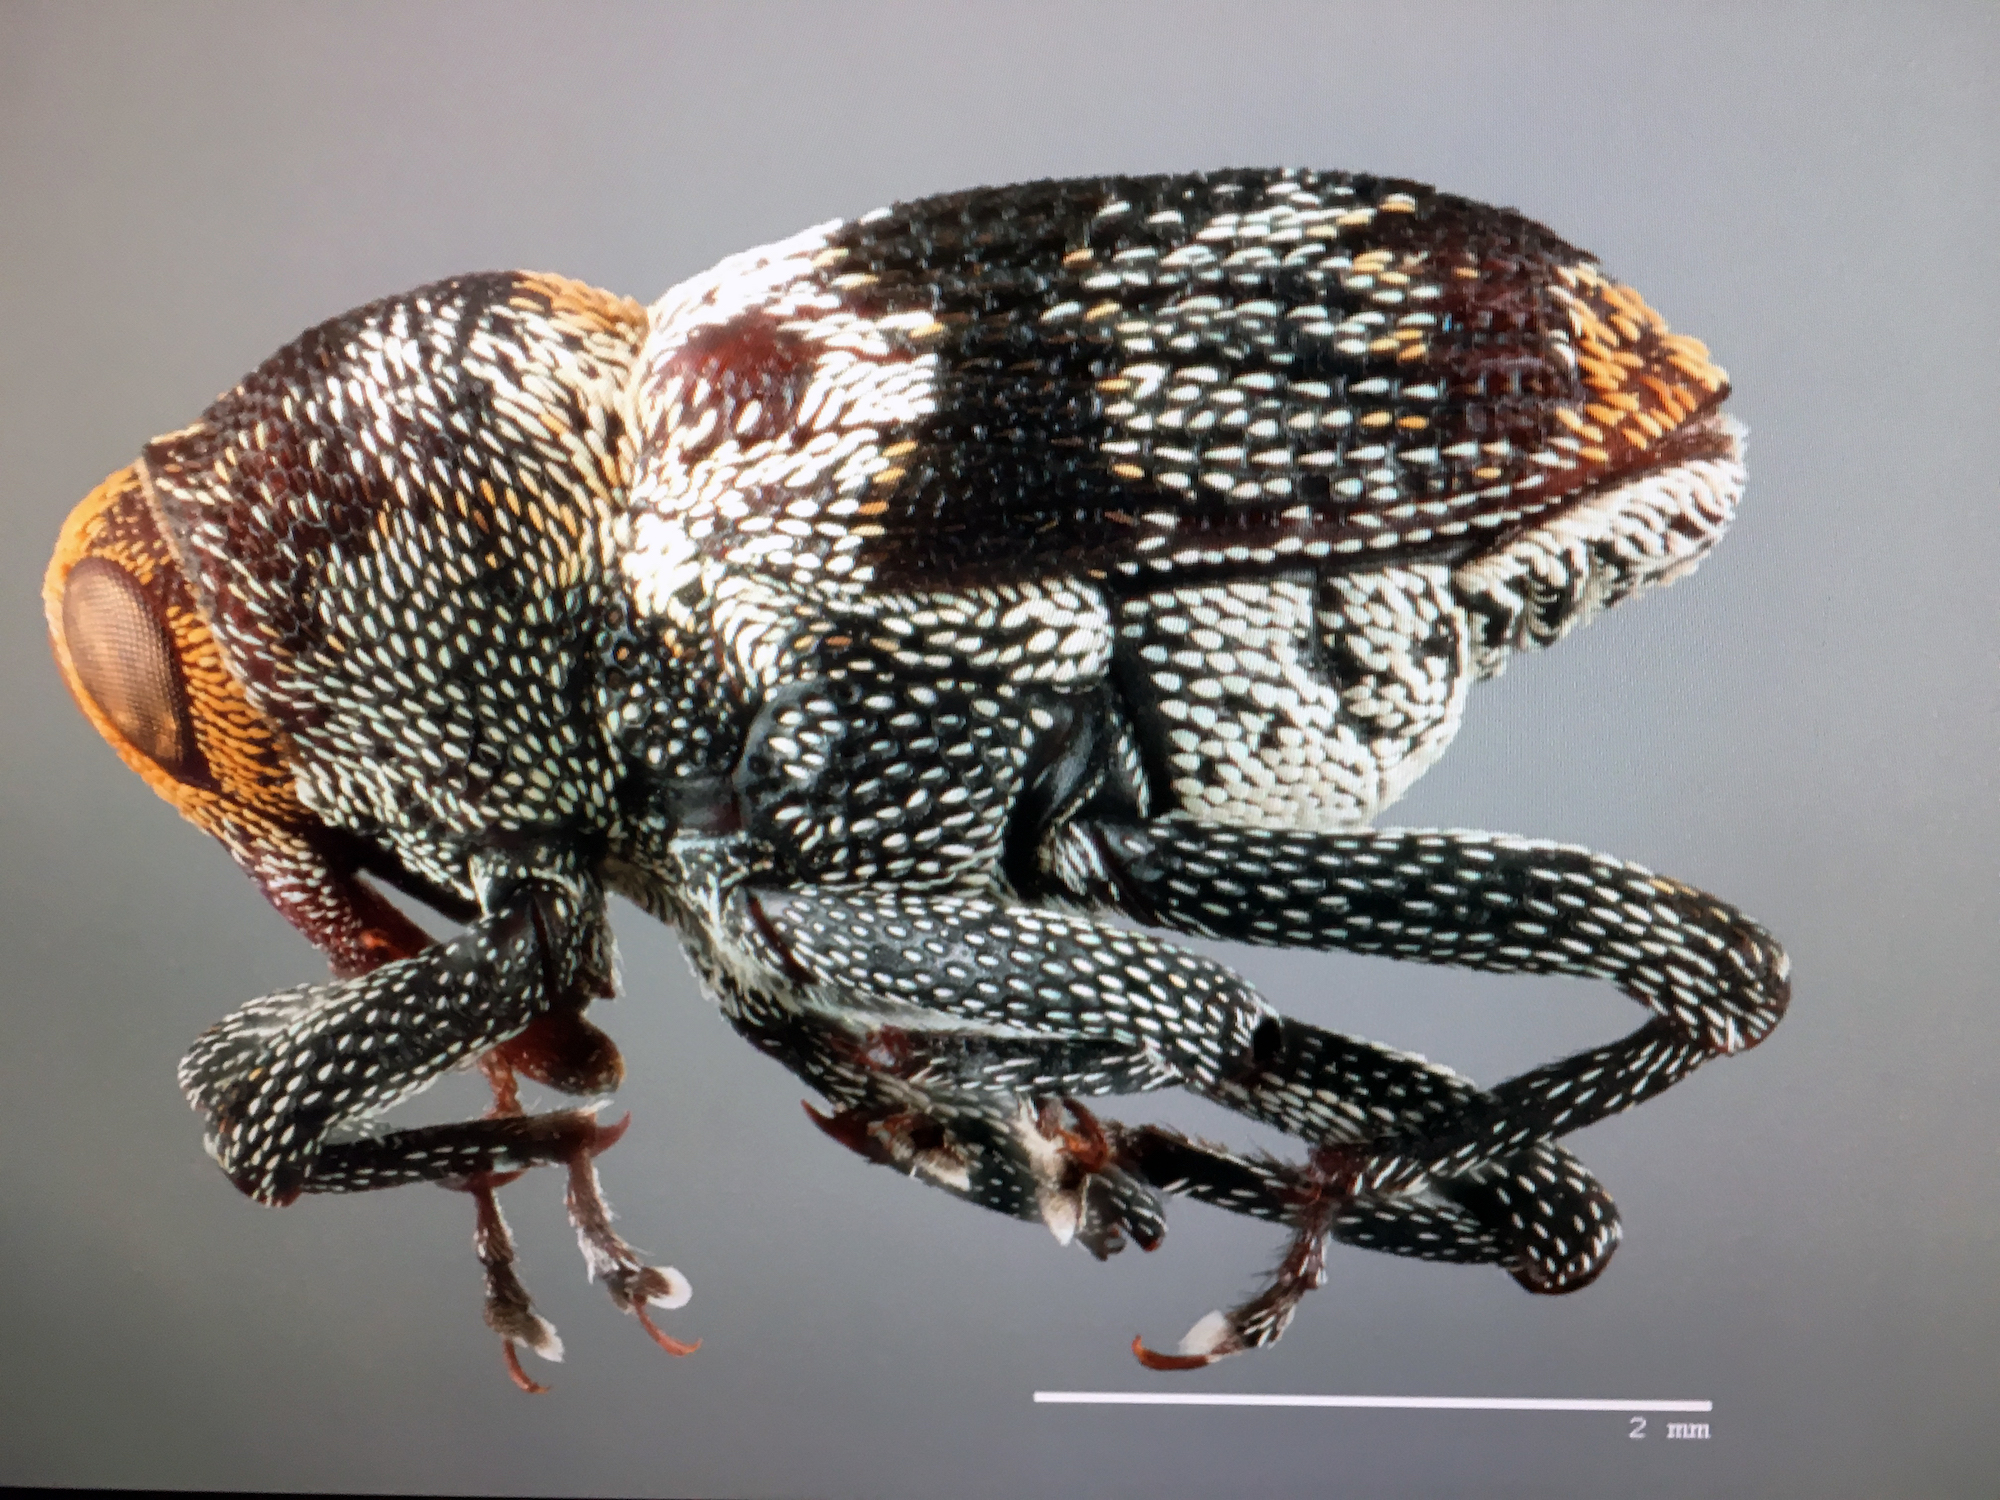 Computer screen shot of Boll Weevil insect being photographed by ASU student.